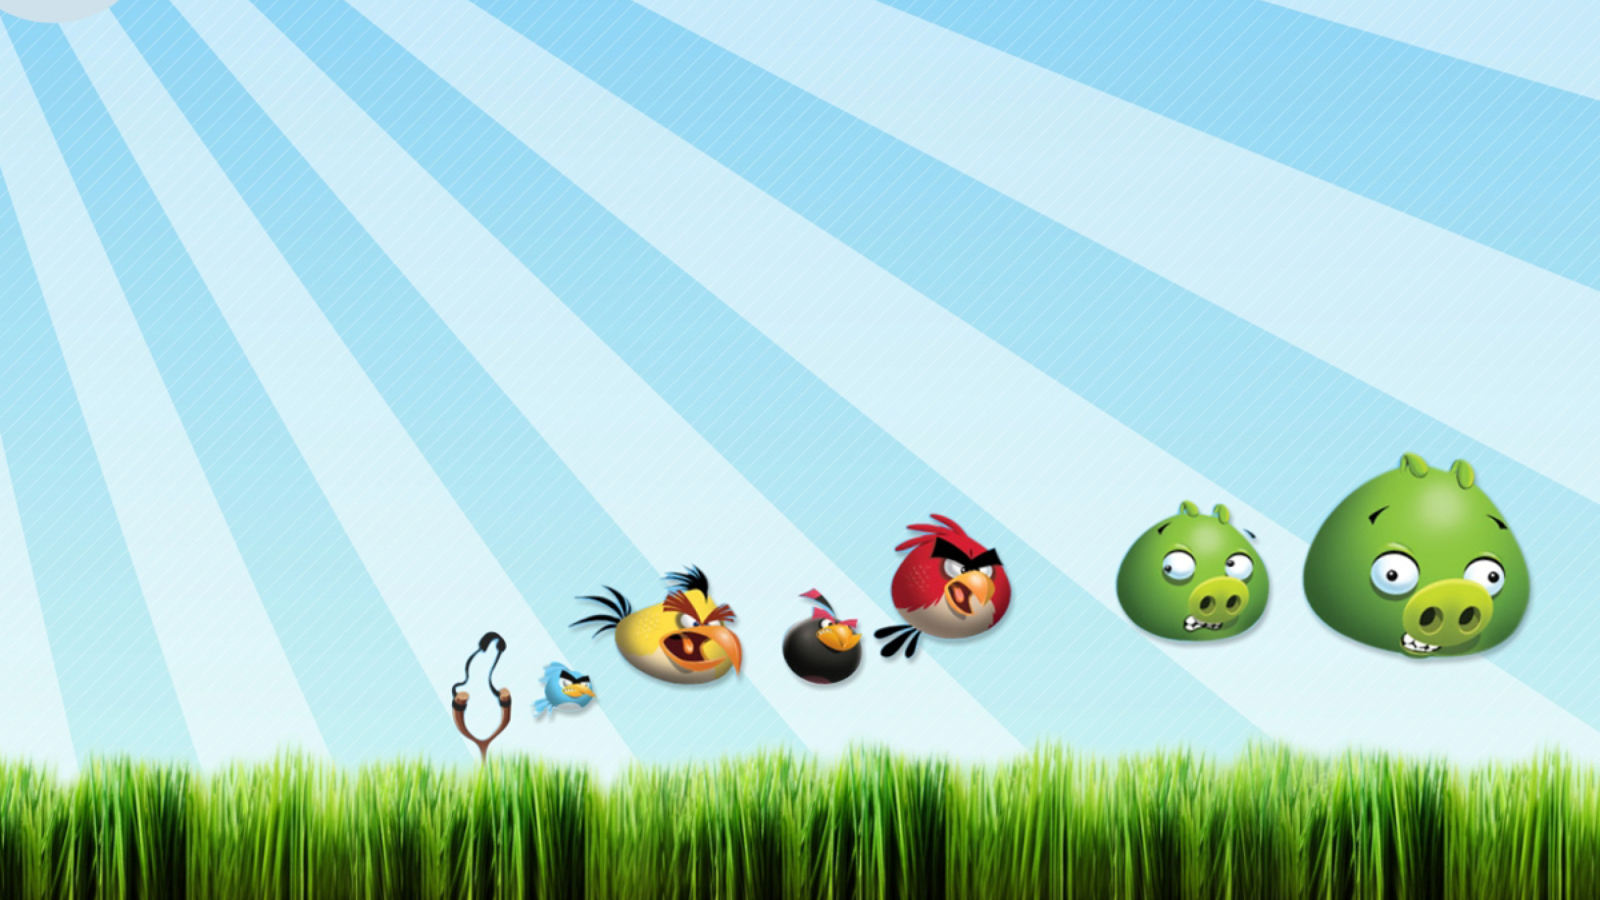 Das Angry Birds Bad Pigs Wallpaper 1600x900